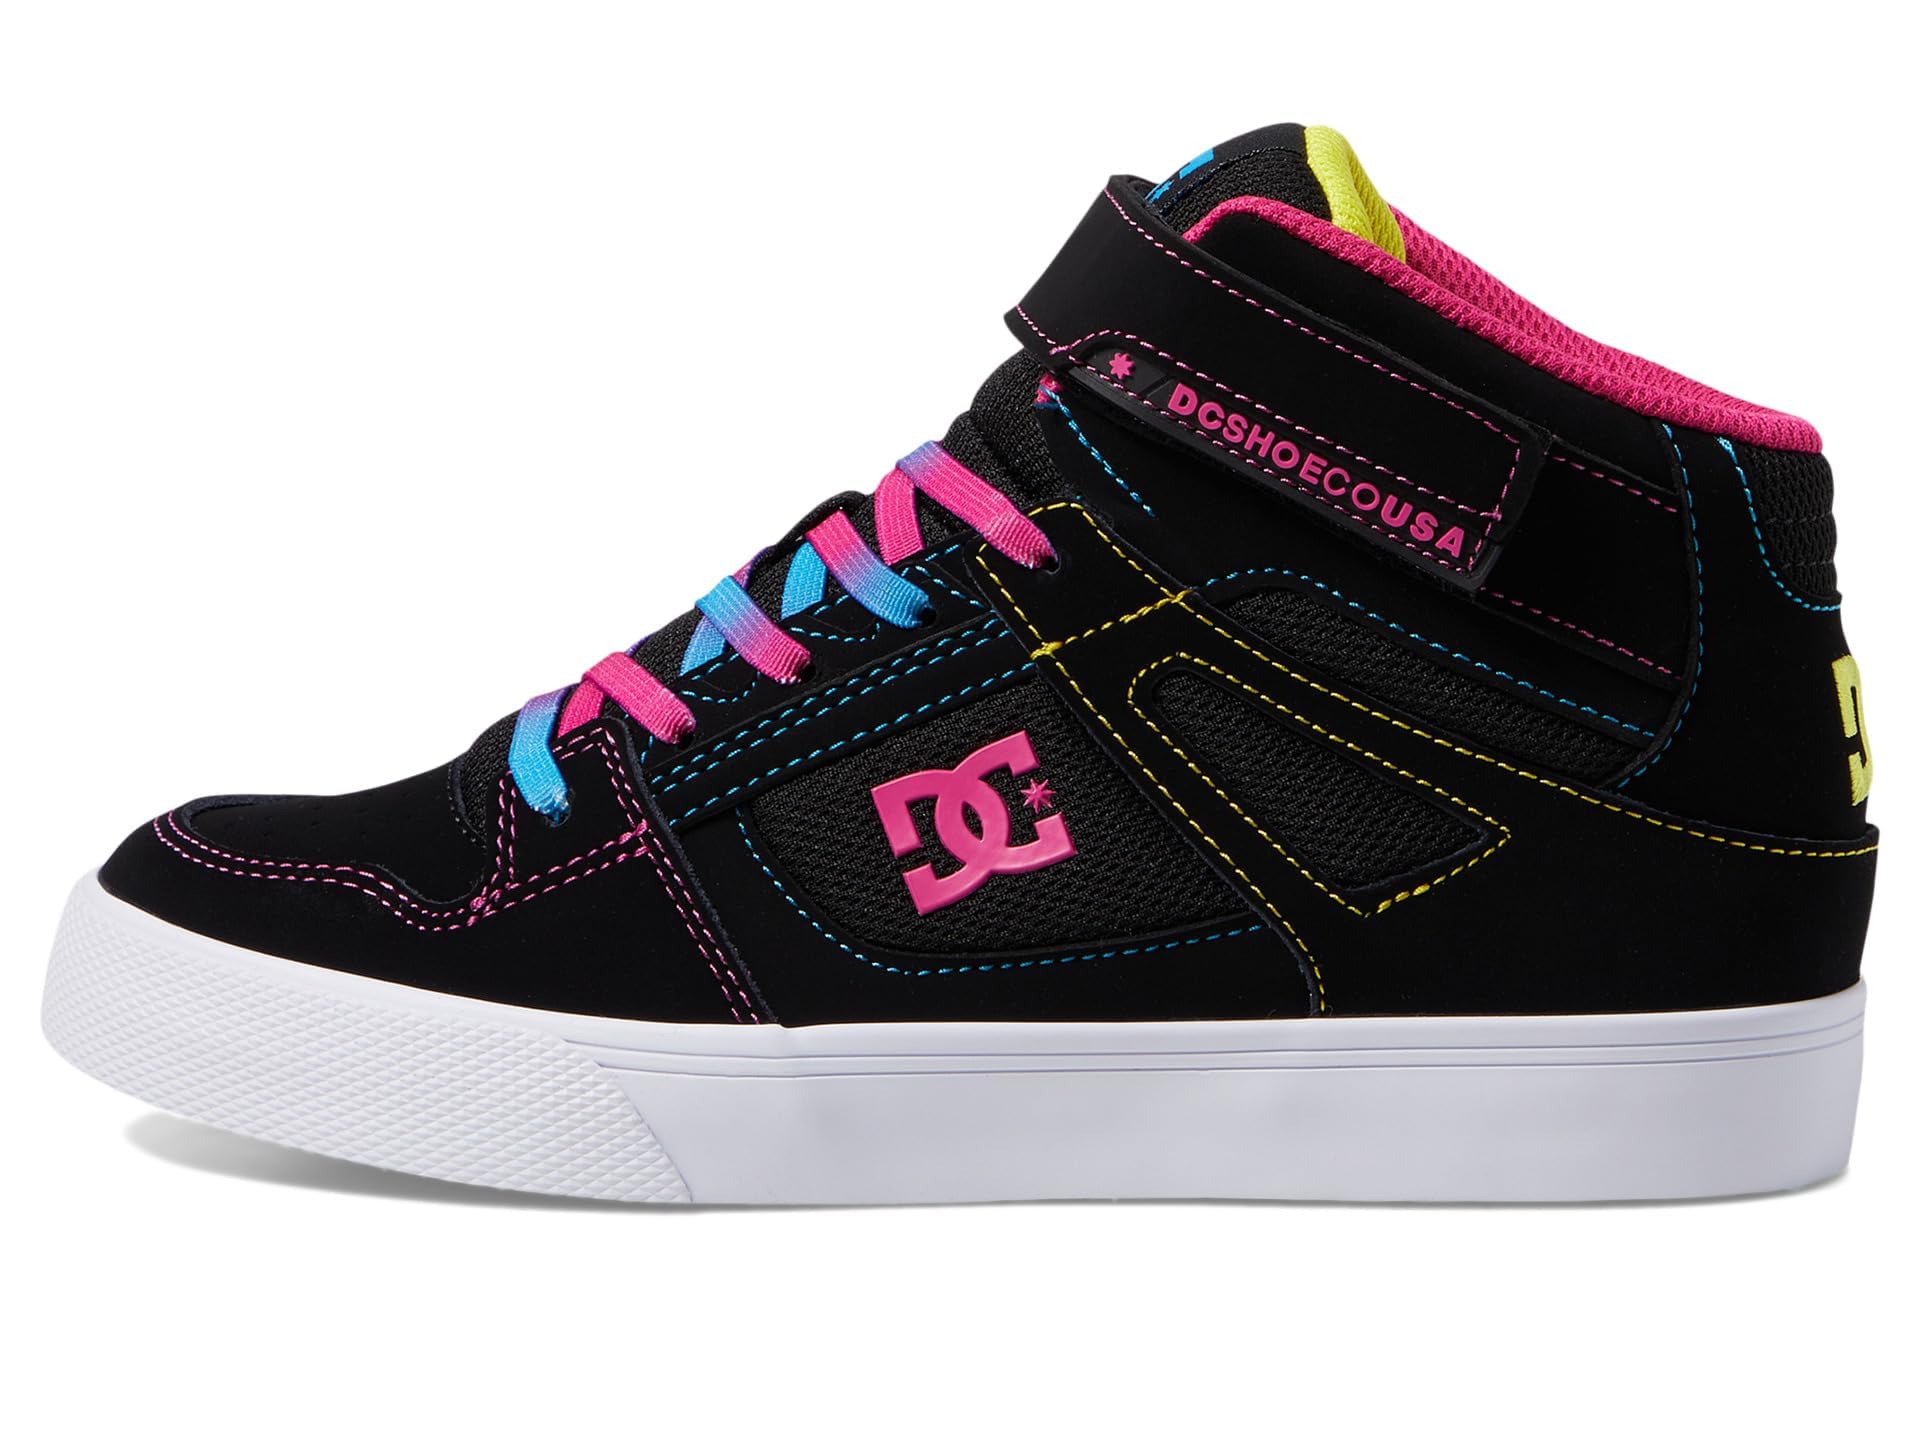 DC Girls Unisex-Child Pure High Top EV Skate Shoes with Ankle Strap and Elastic Laces Multi 12.5 Little Kid